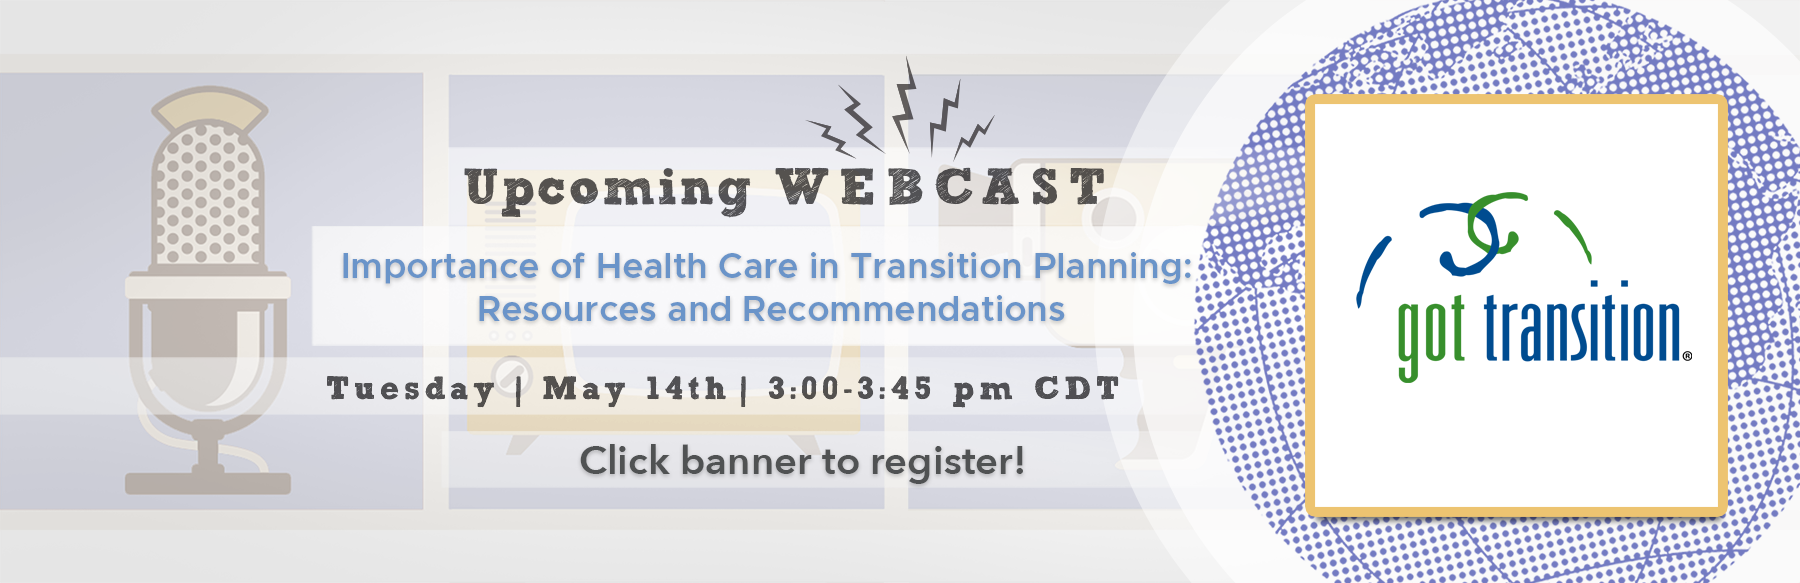 Importance of Health Care in Transition Planning: Resources and Recommendations webcast banner